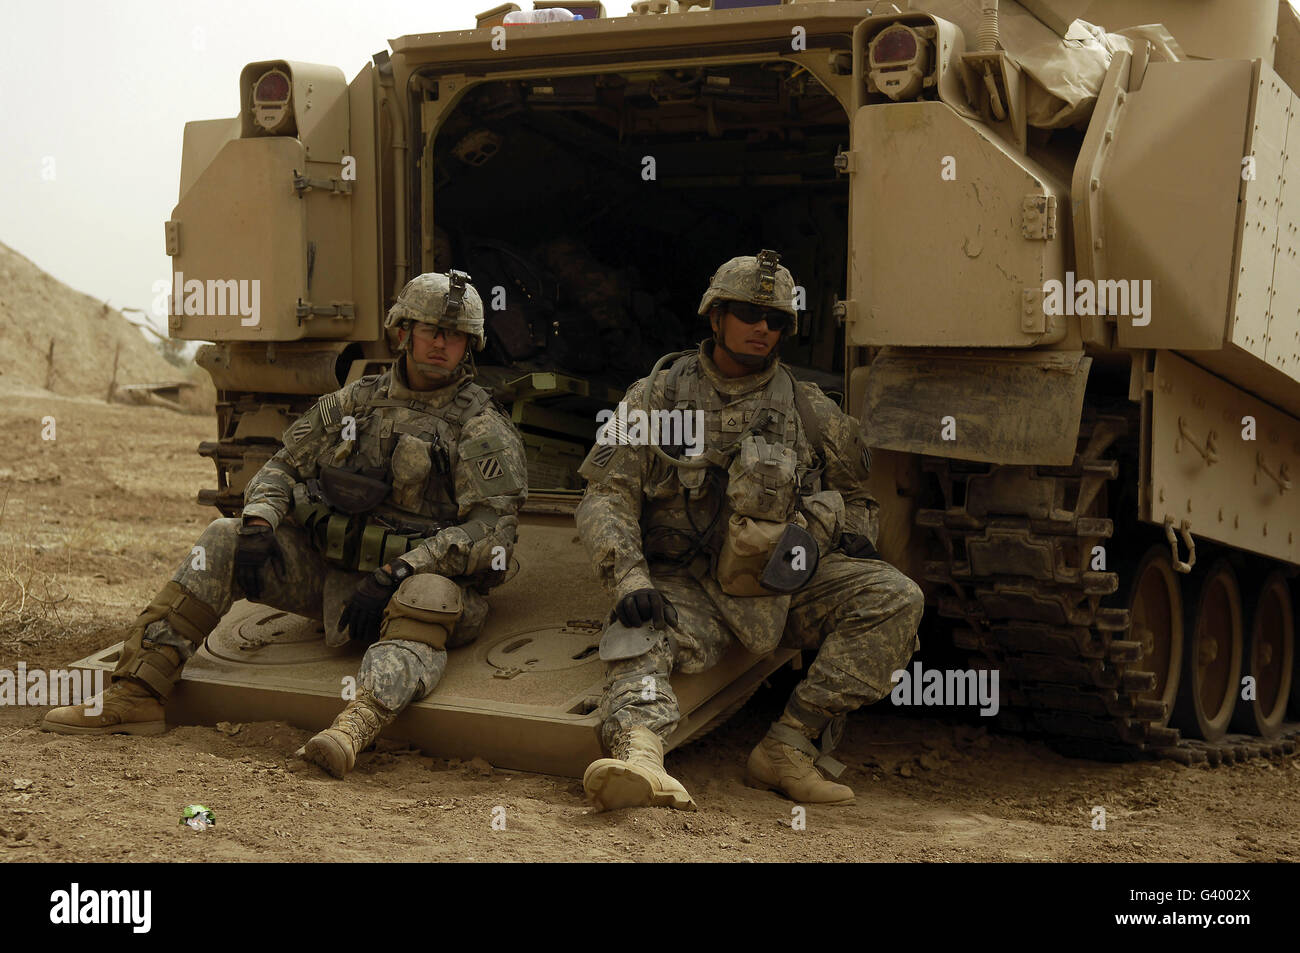 U.S. Army soldiers waiting at Patrol Base Cashe, Iraq. Stock Photo